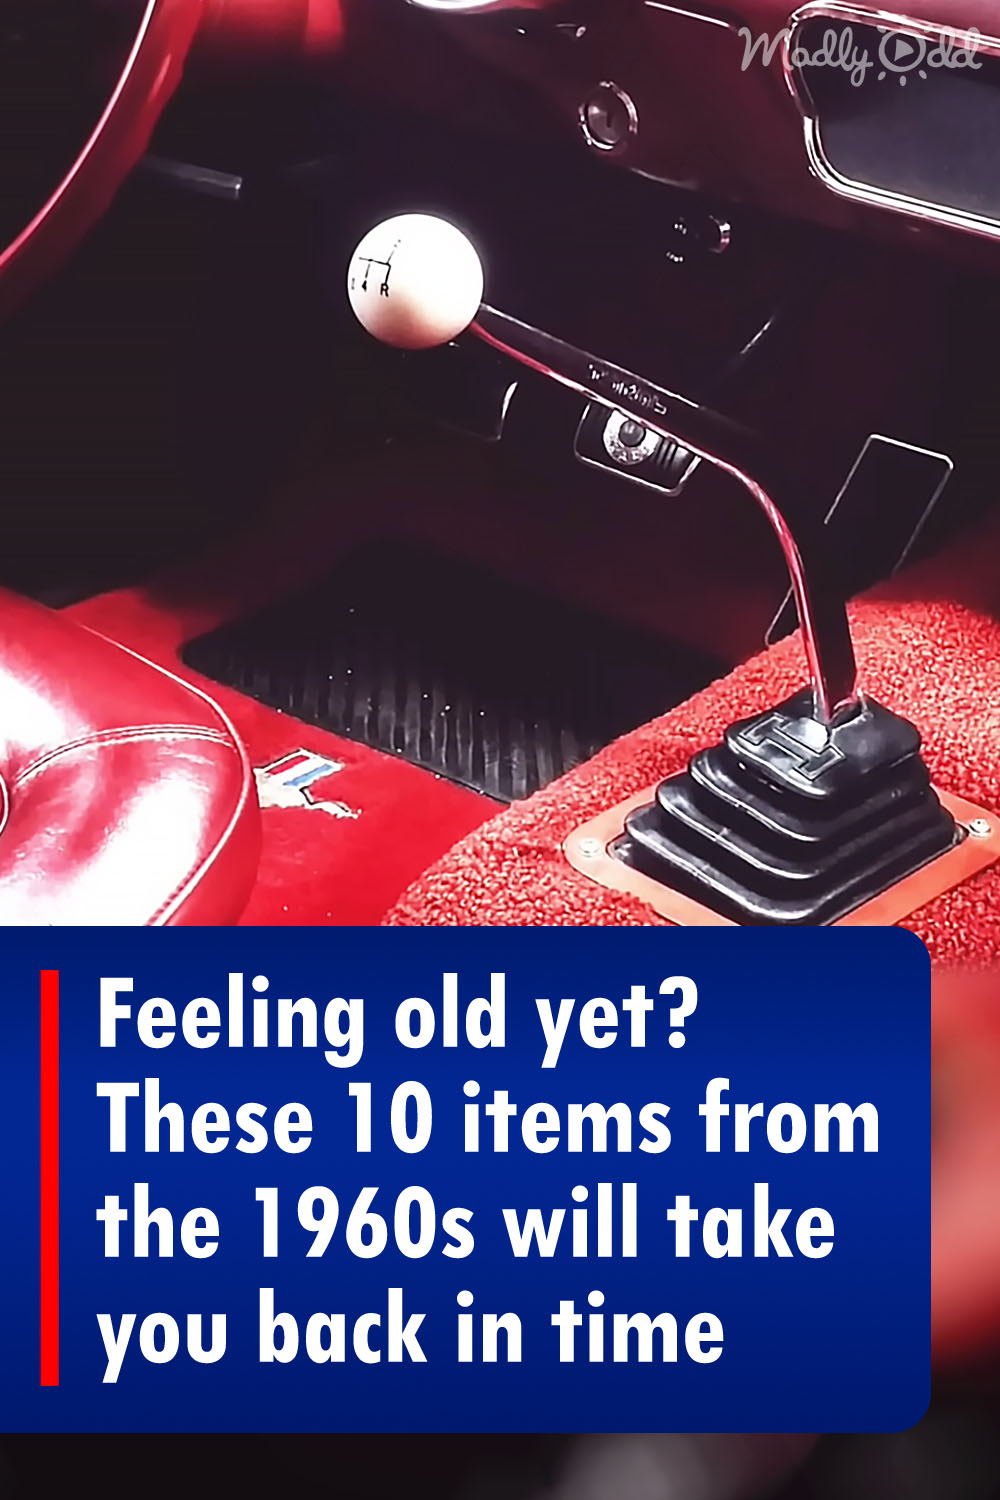 Feeling old yet? These 10 items from the 1960s will take you back in time